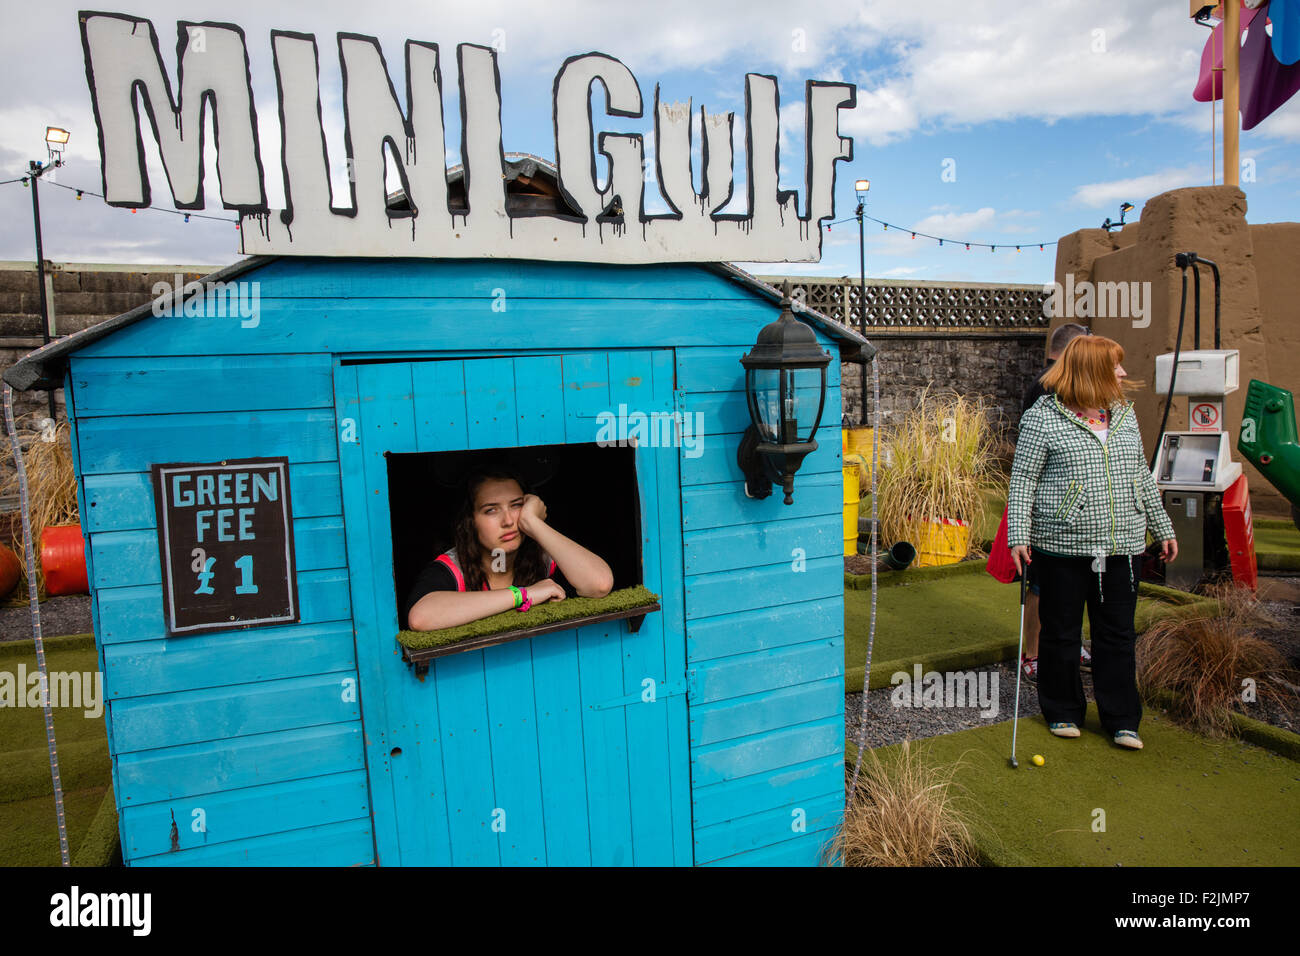 Picture of ennui in the pay booth of the Mini Gulf course at Dismaland - Banksy's theme park attraction in Weston super Mare Stock Photo